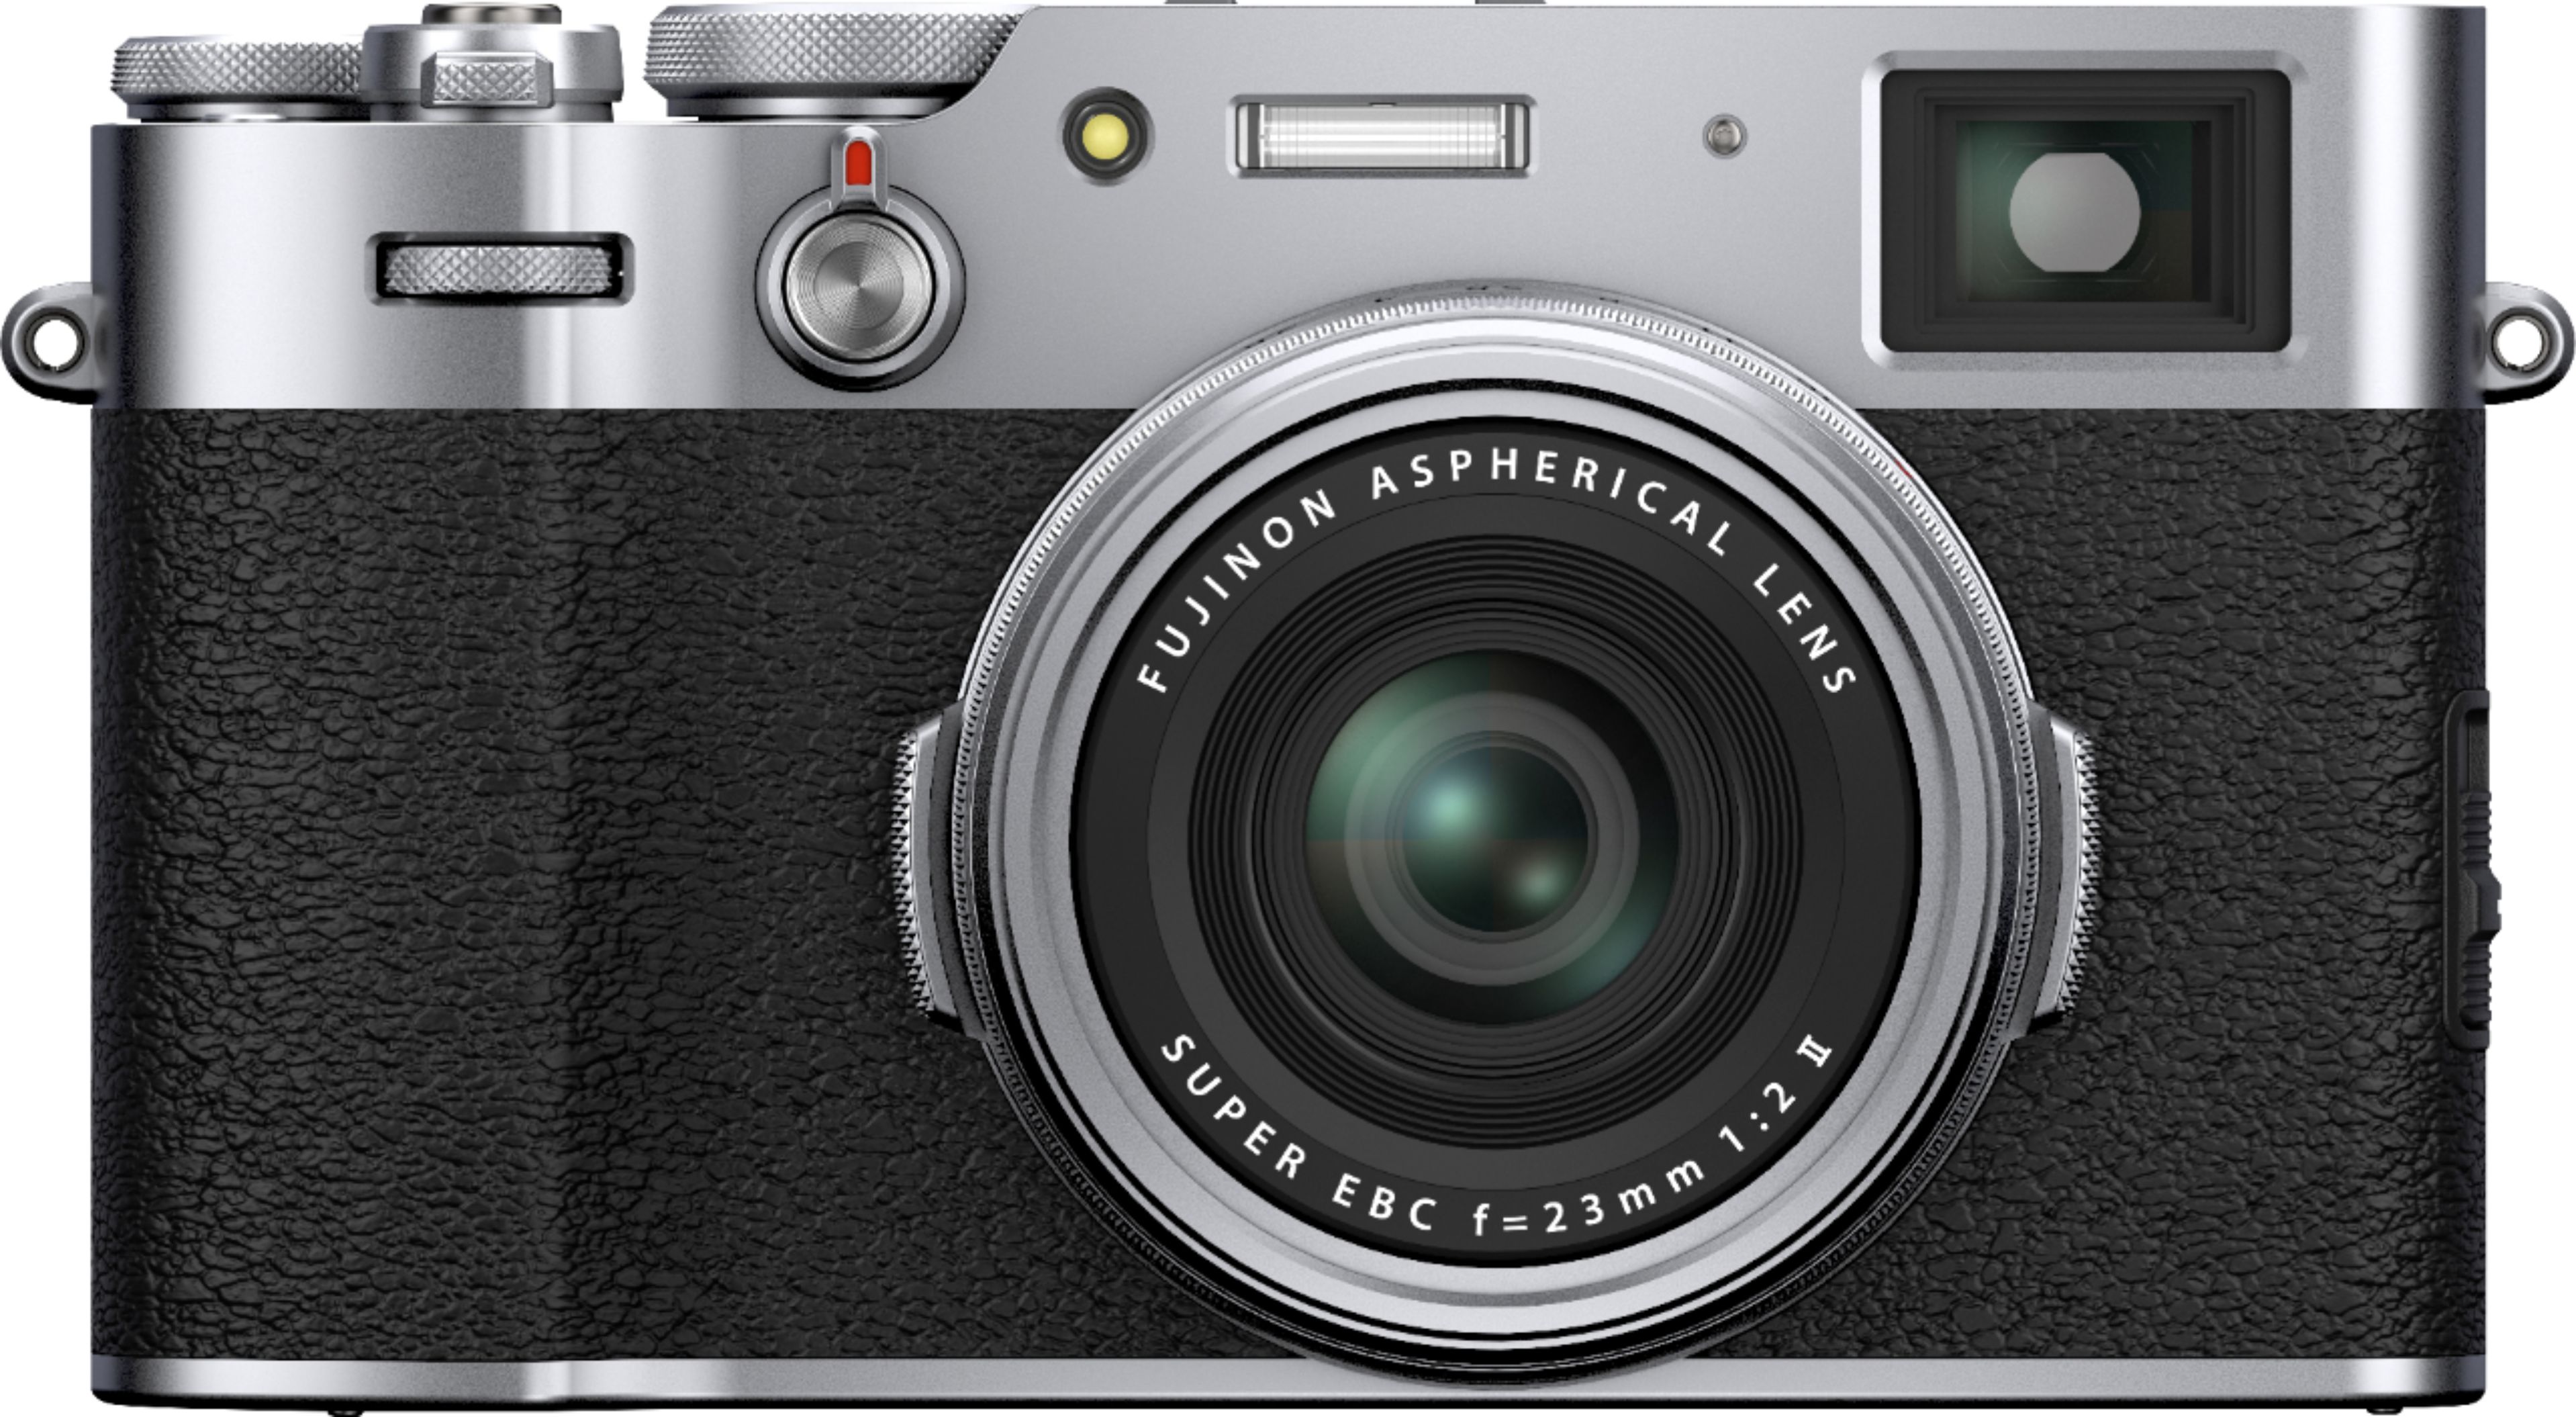 Point and Shoot Cameras: Compact Digital Cameras - Best Buy